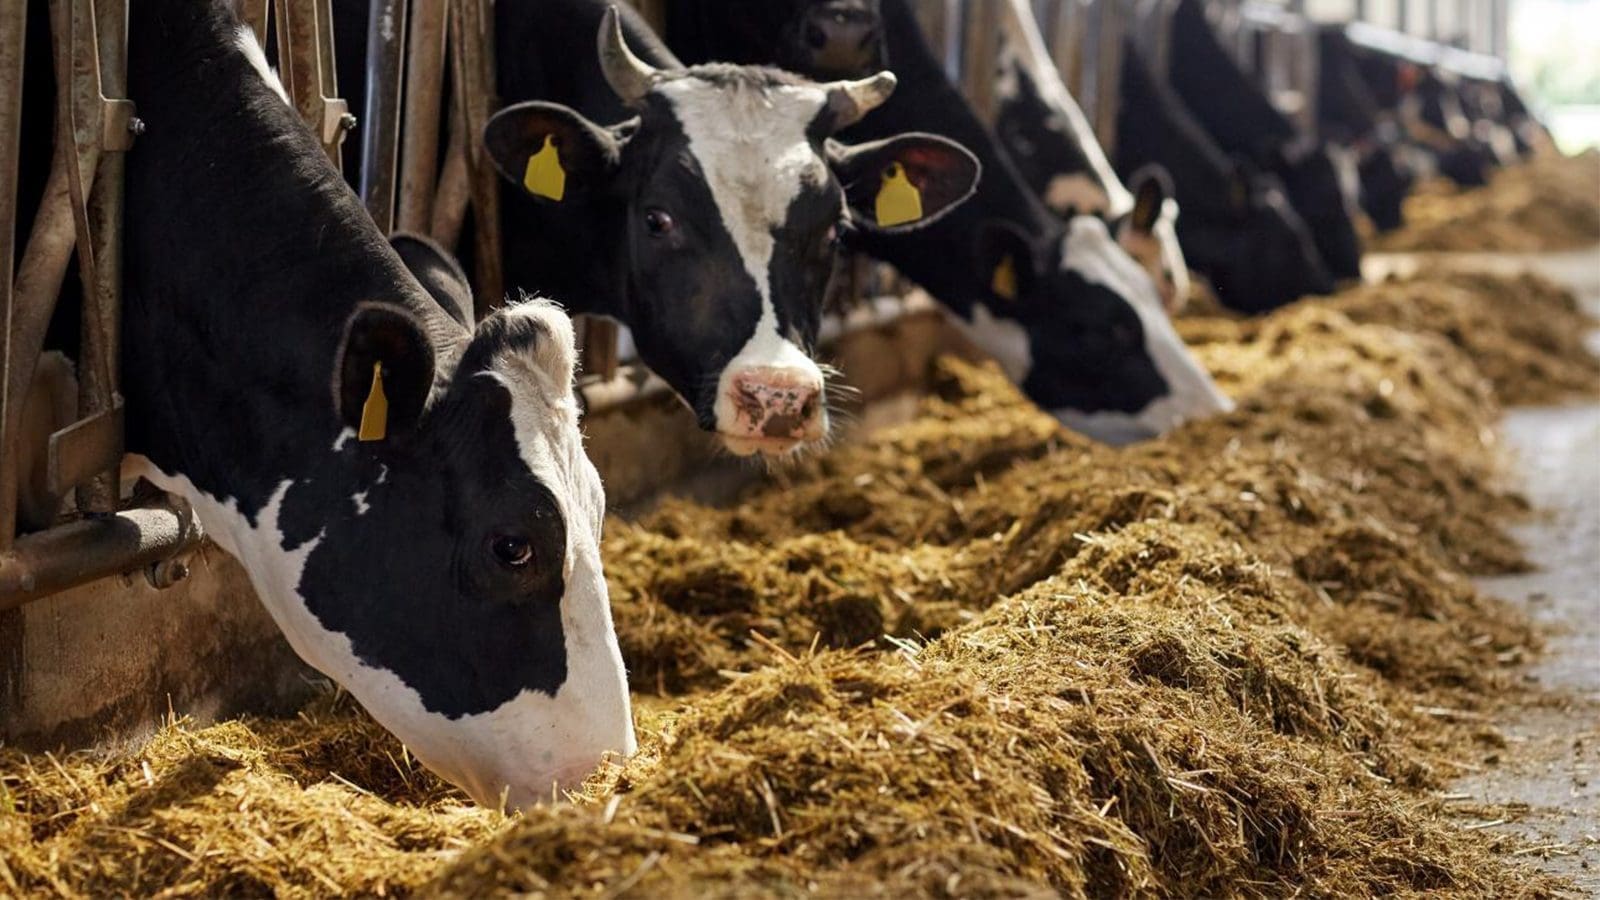 EFSA opens public consultation on proposed draft methodology for animal welfare